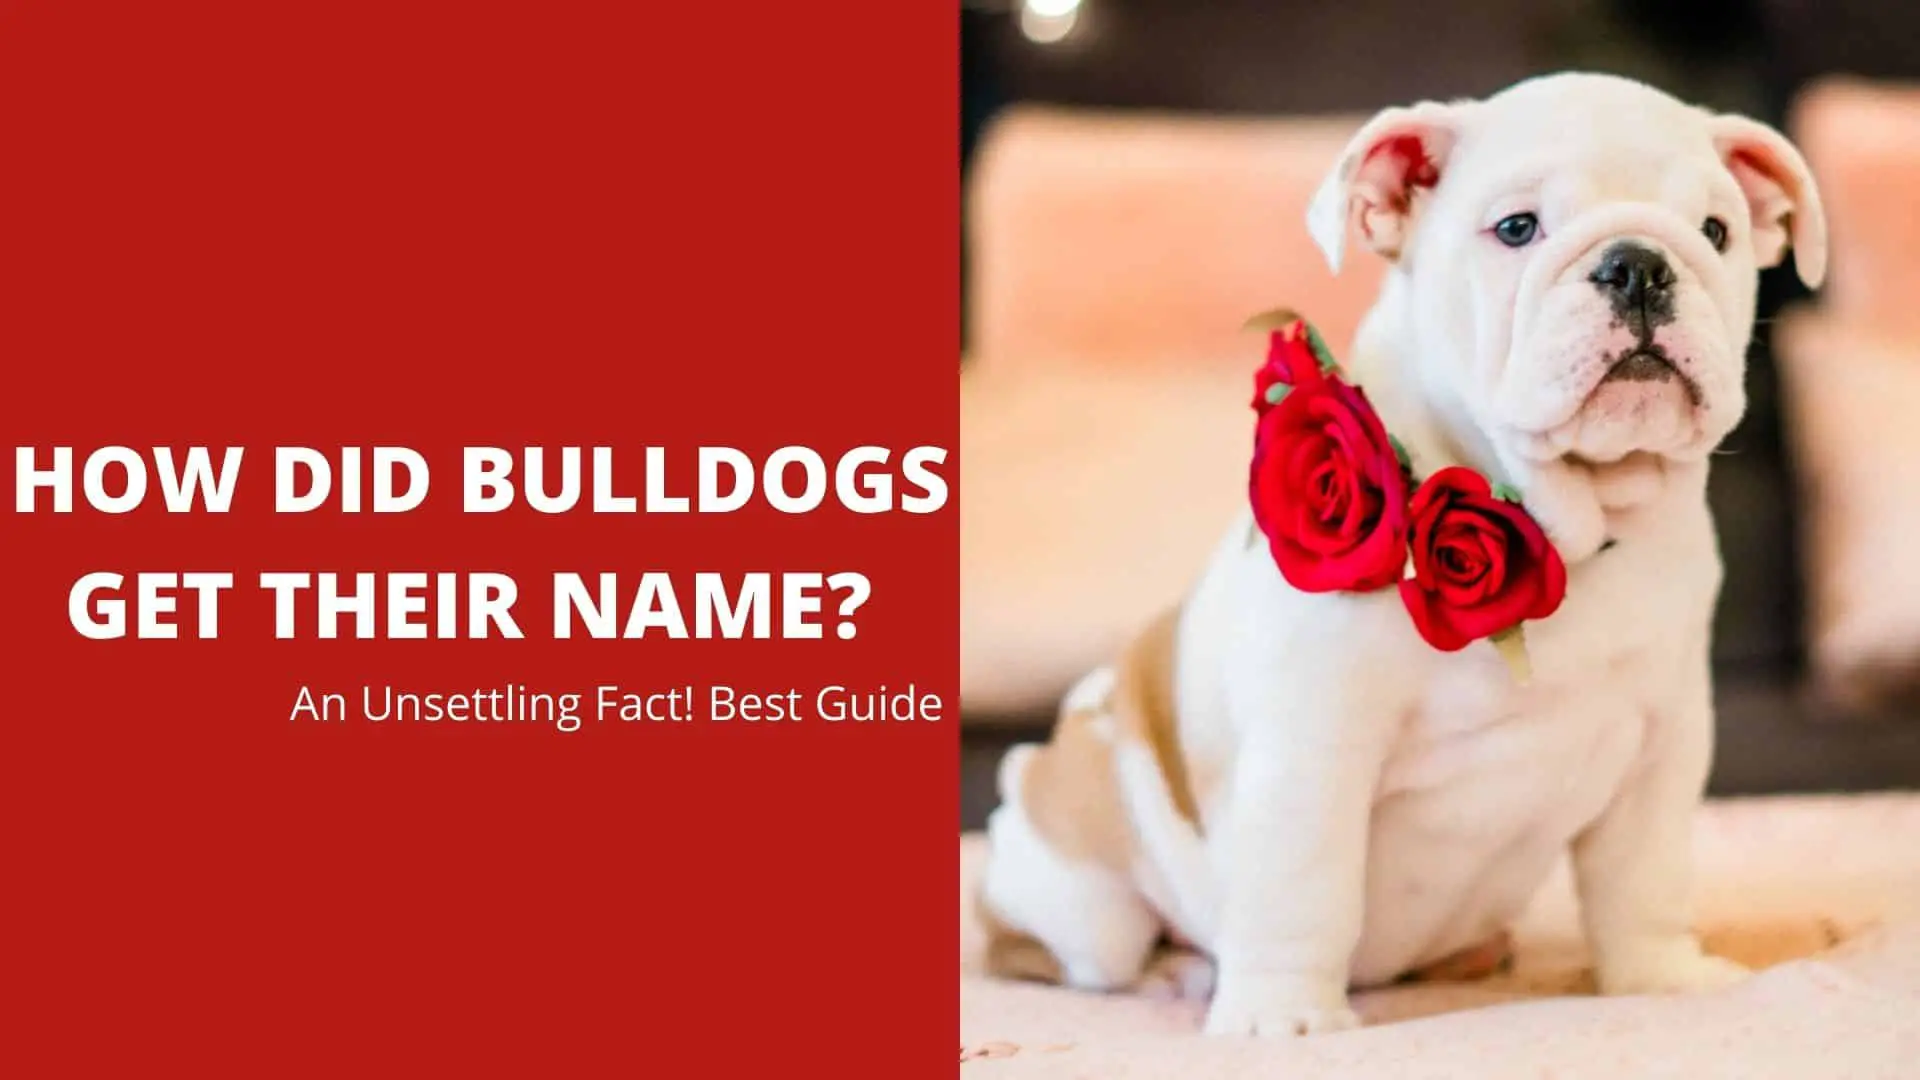 How Did Bulldogs Get Their Name? An Unsettling Fact! Best Guide 2022